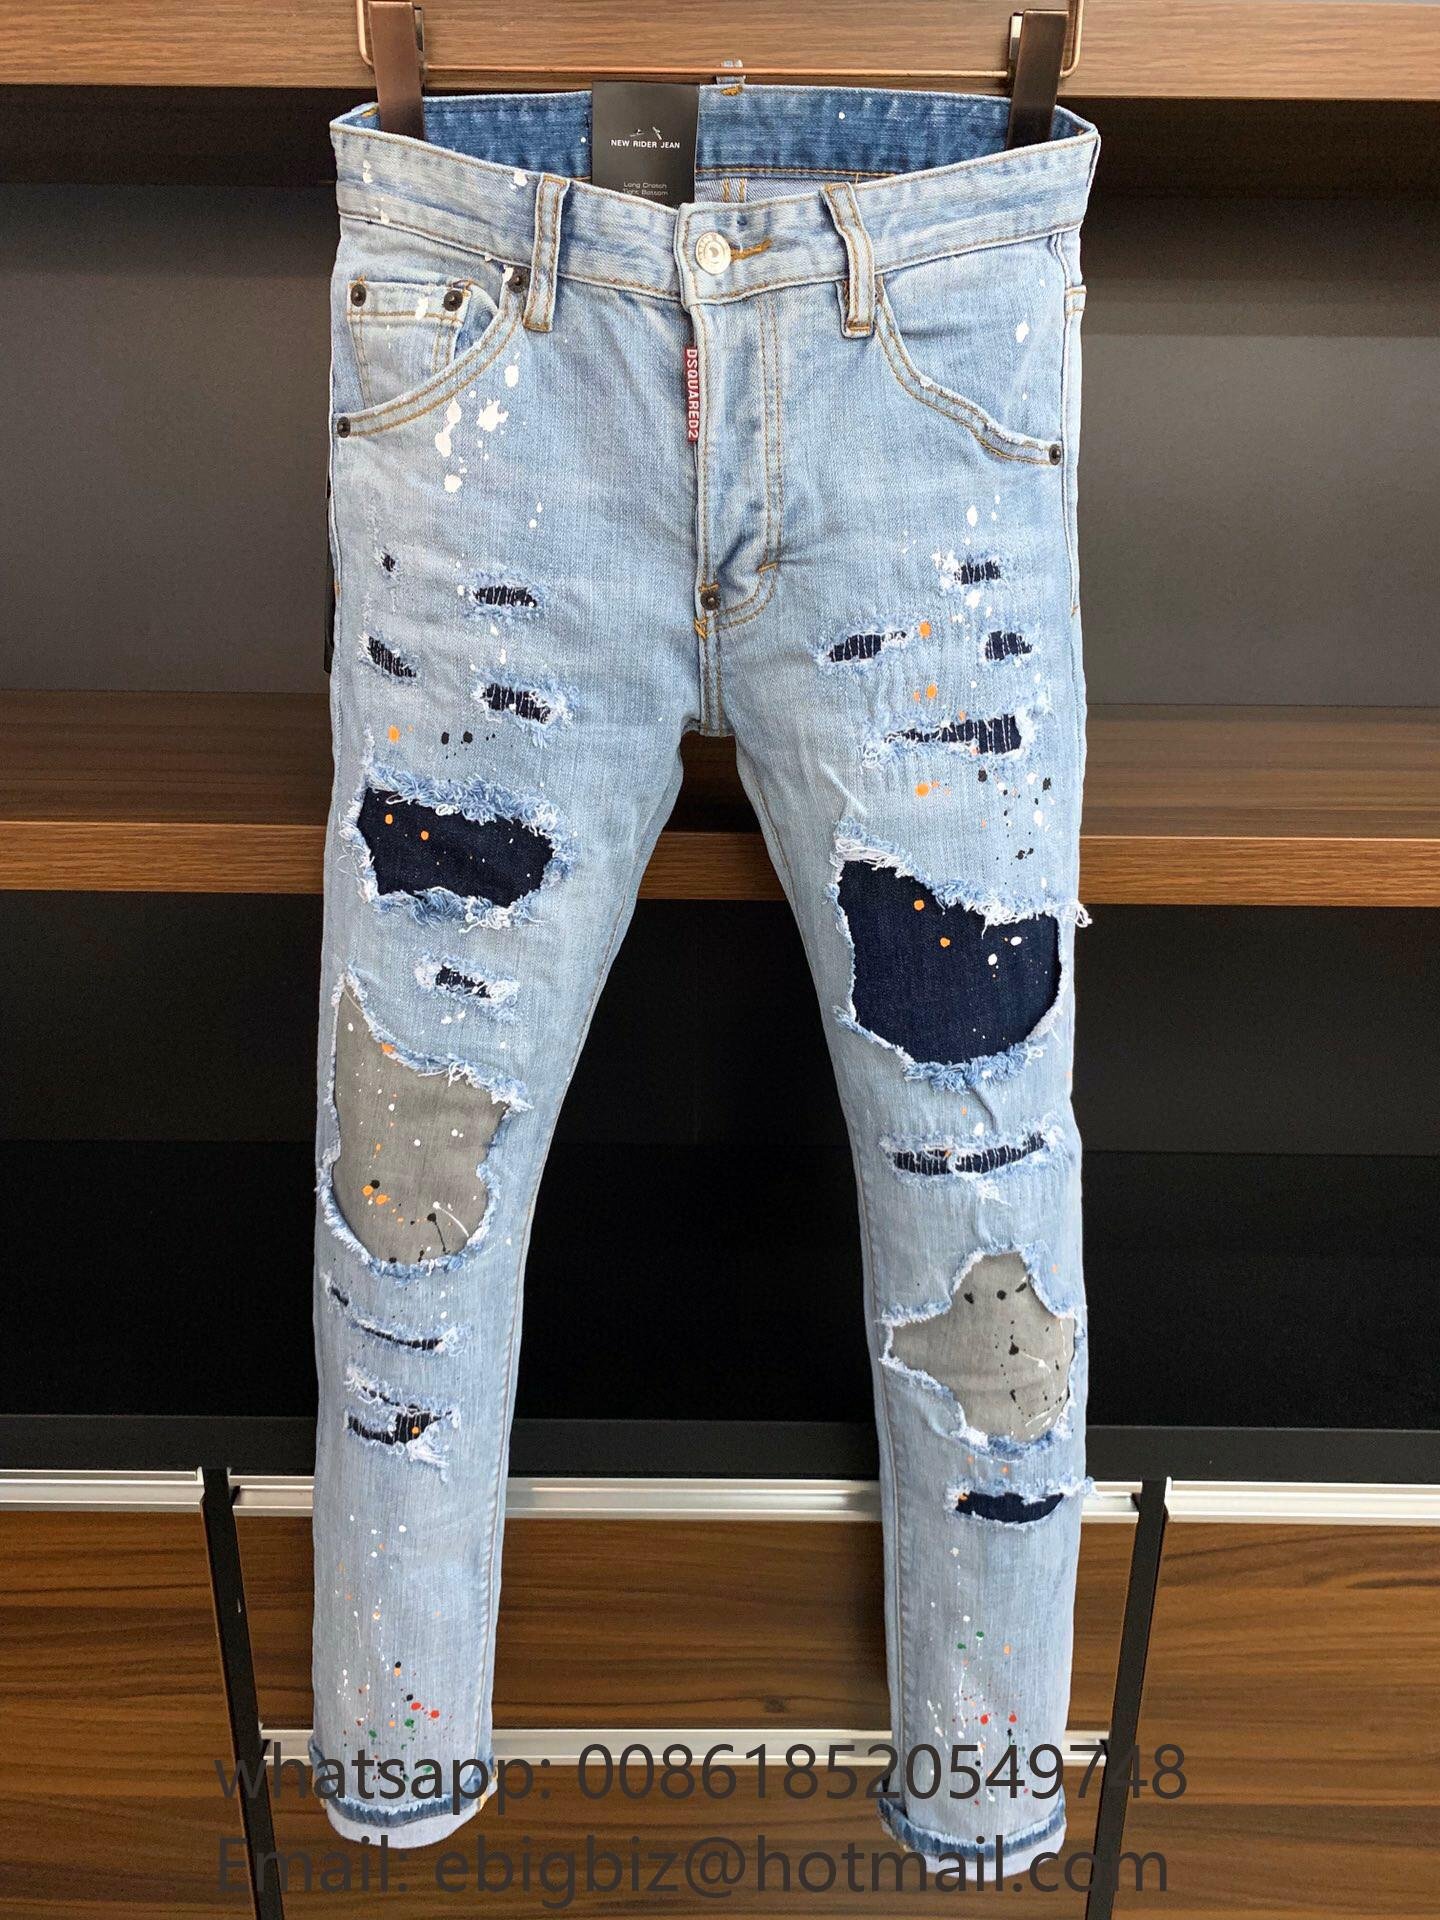 Wholesale Dsquared2 jeans men DSQUARED Jeans for men Dsquared2 jeans Trading Company) - Overcoat - Apparel & Fashion